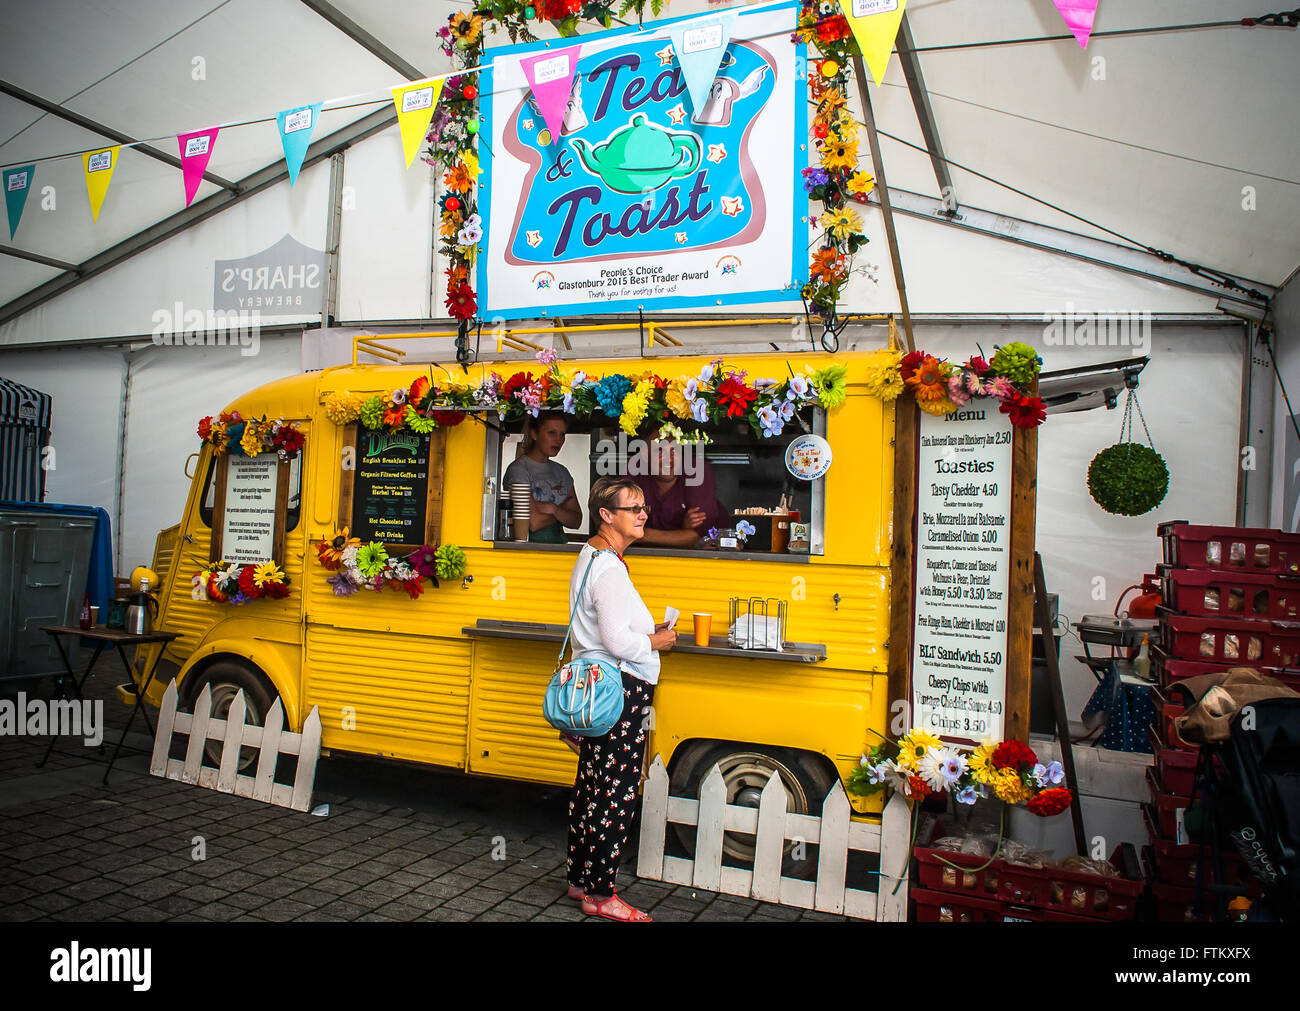 A quaint little van converted to serve refreshments at the British Street Food Festival in 2015. Stock Photo